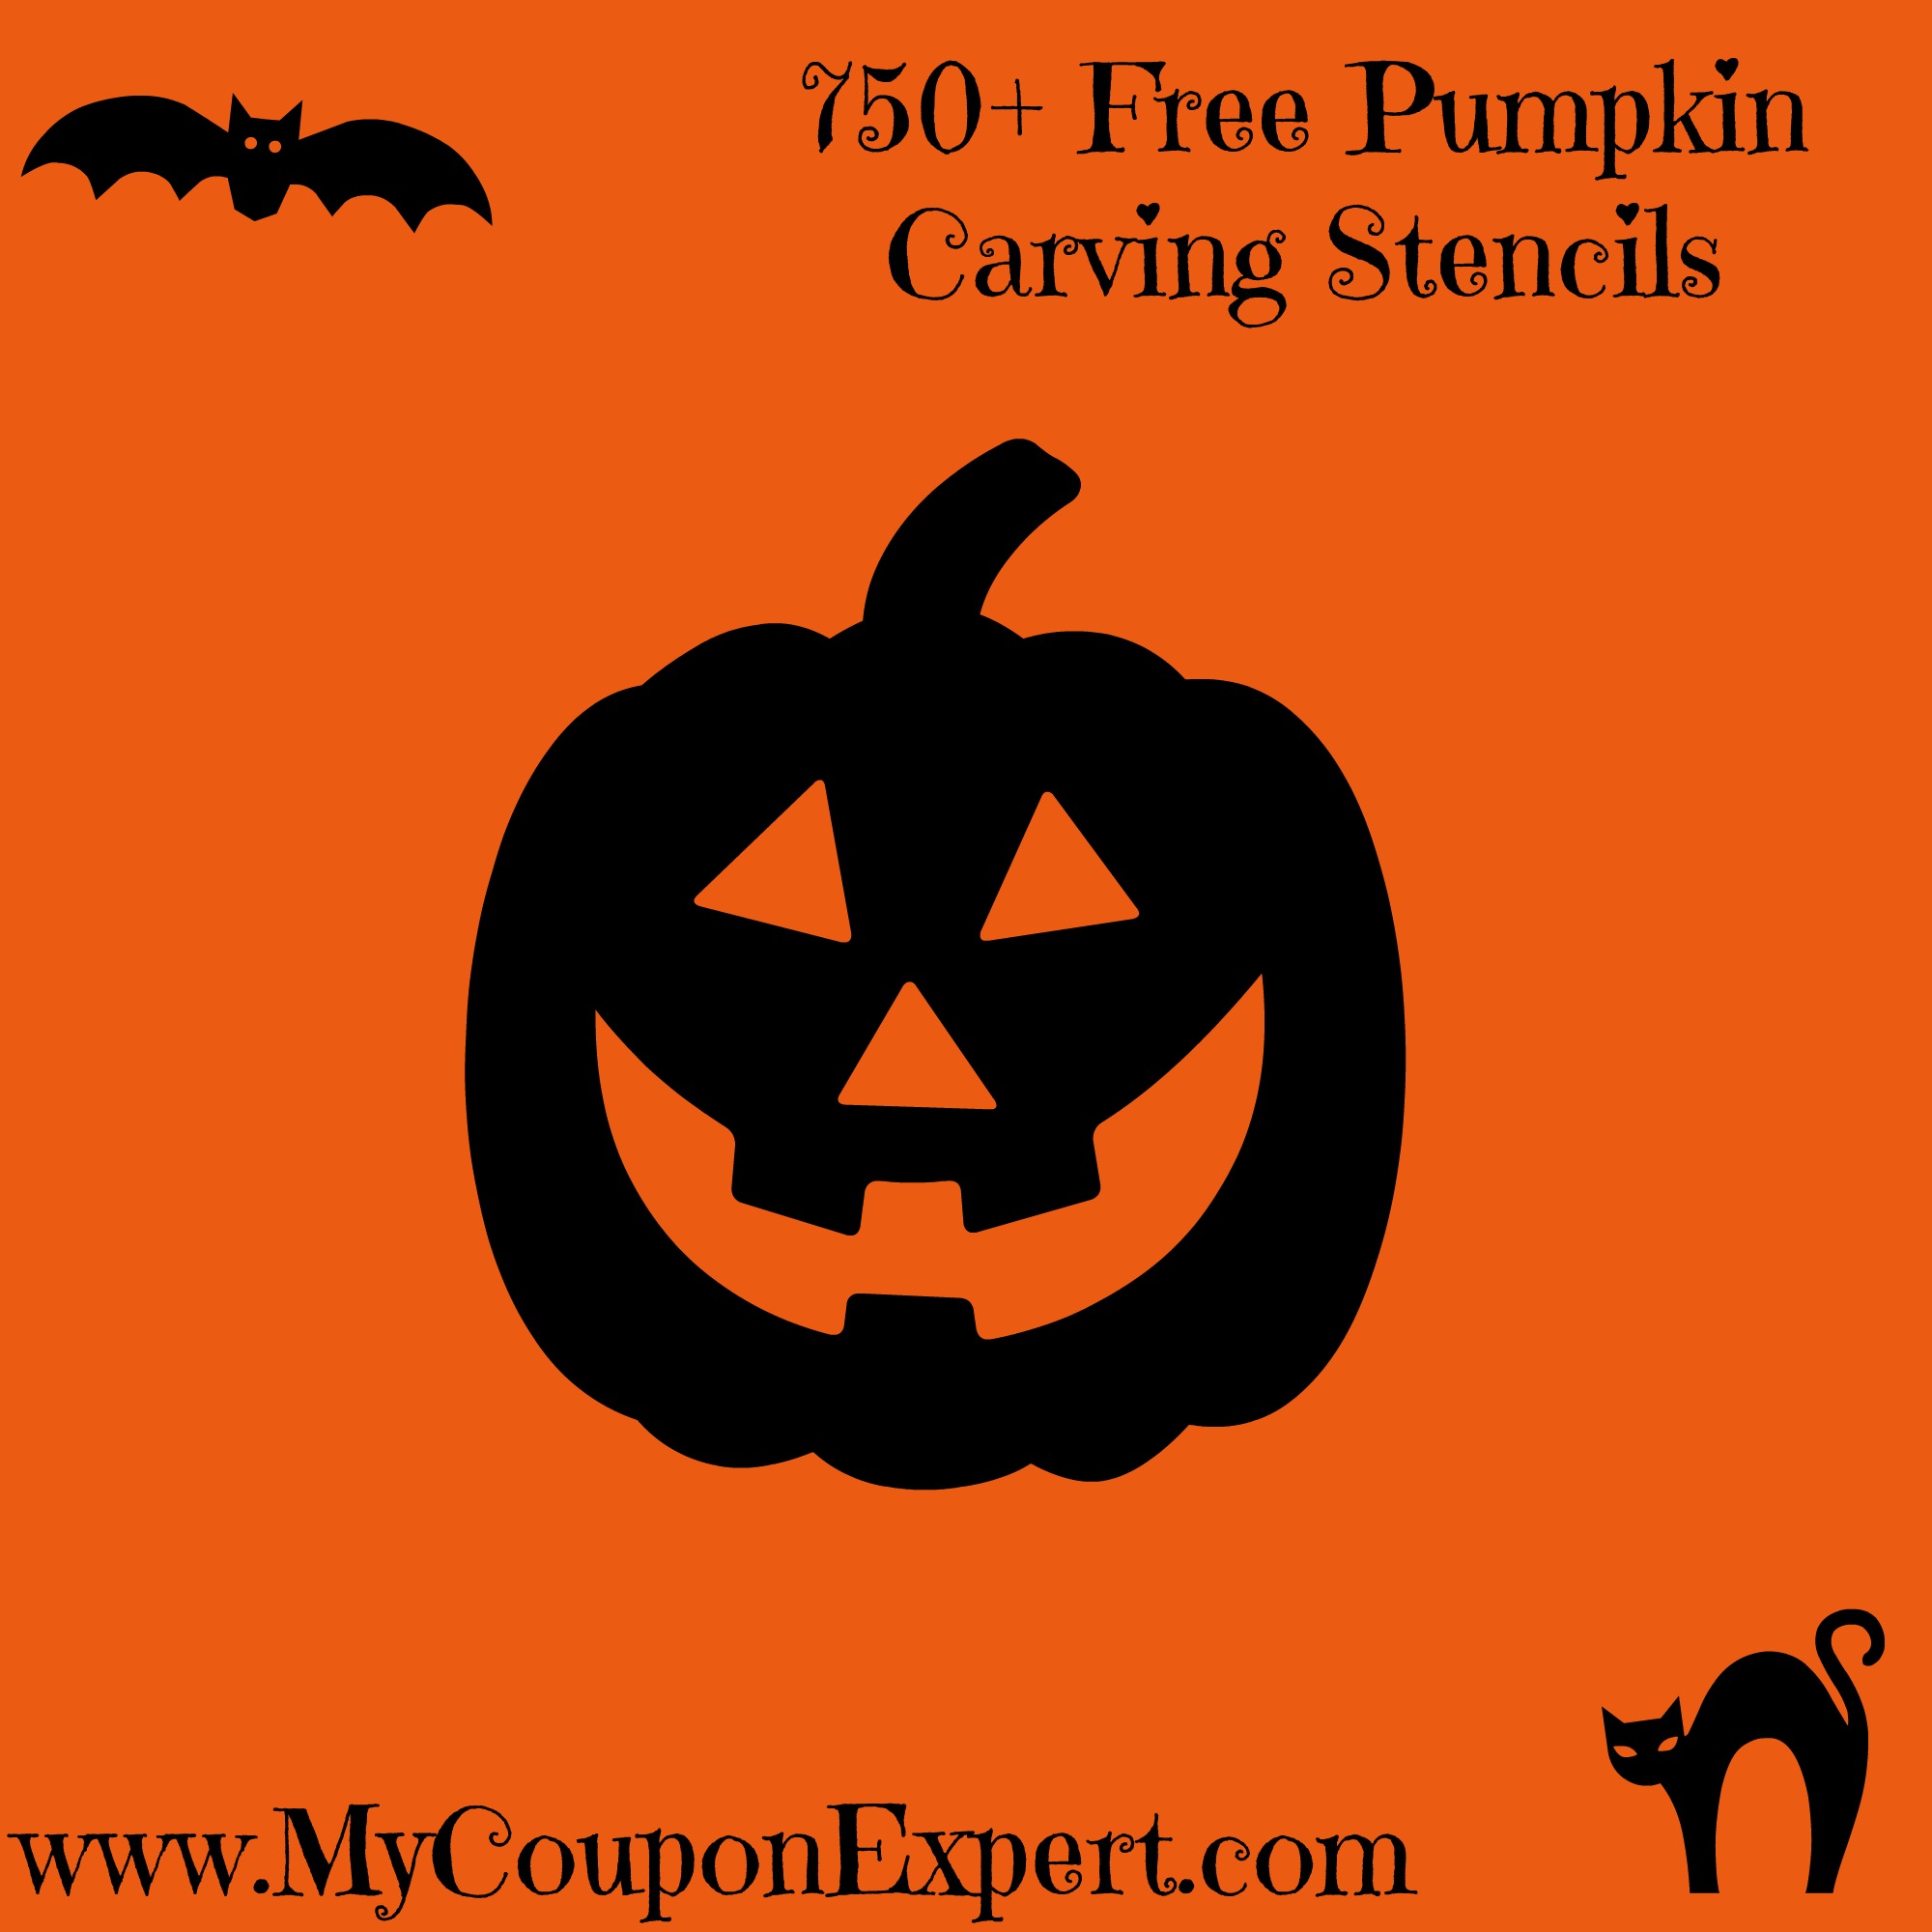 31-free-pumpkin-carving-stencils-to-take-your-jack-o-lantern-to-the